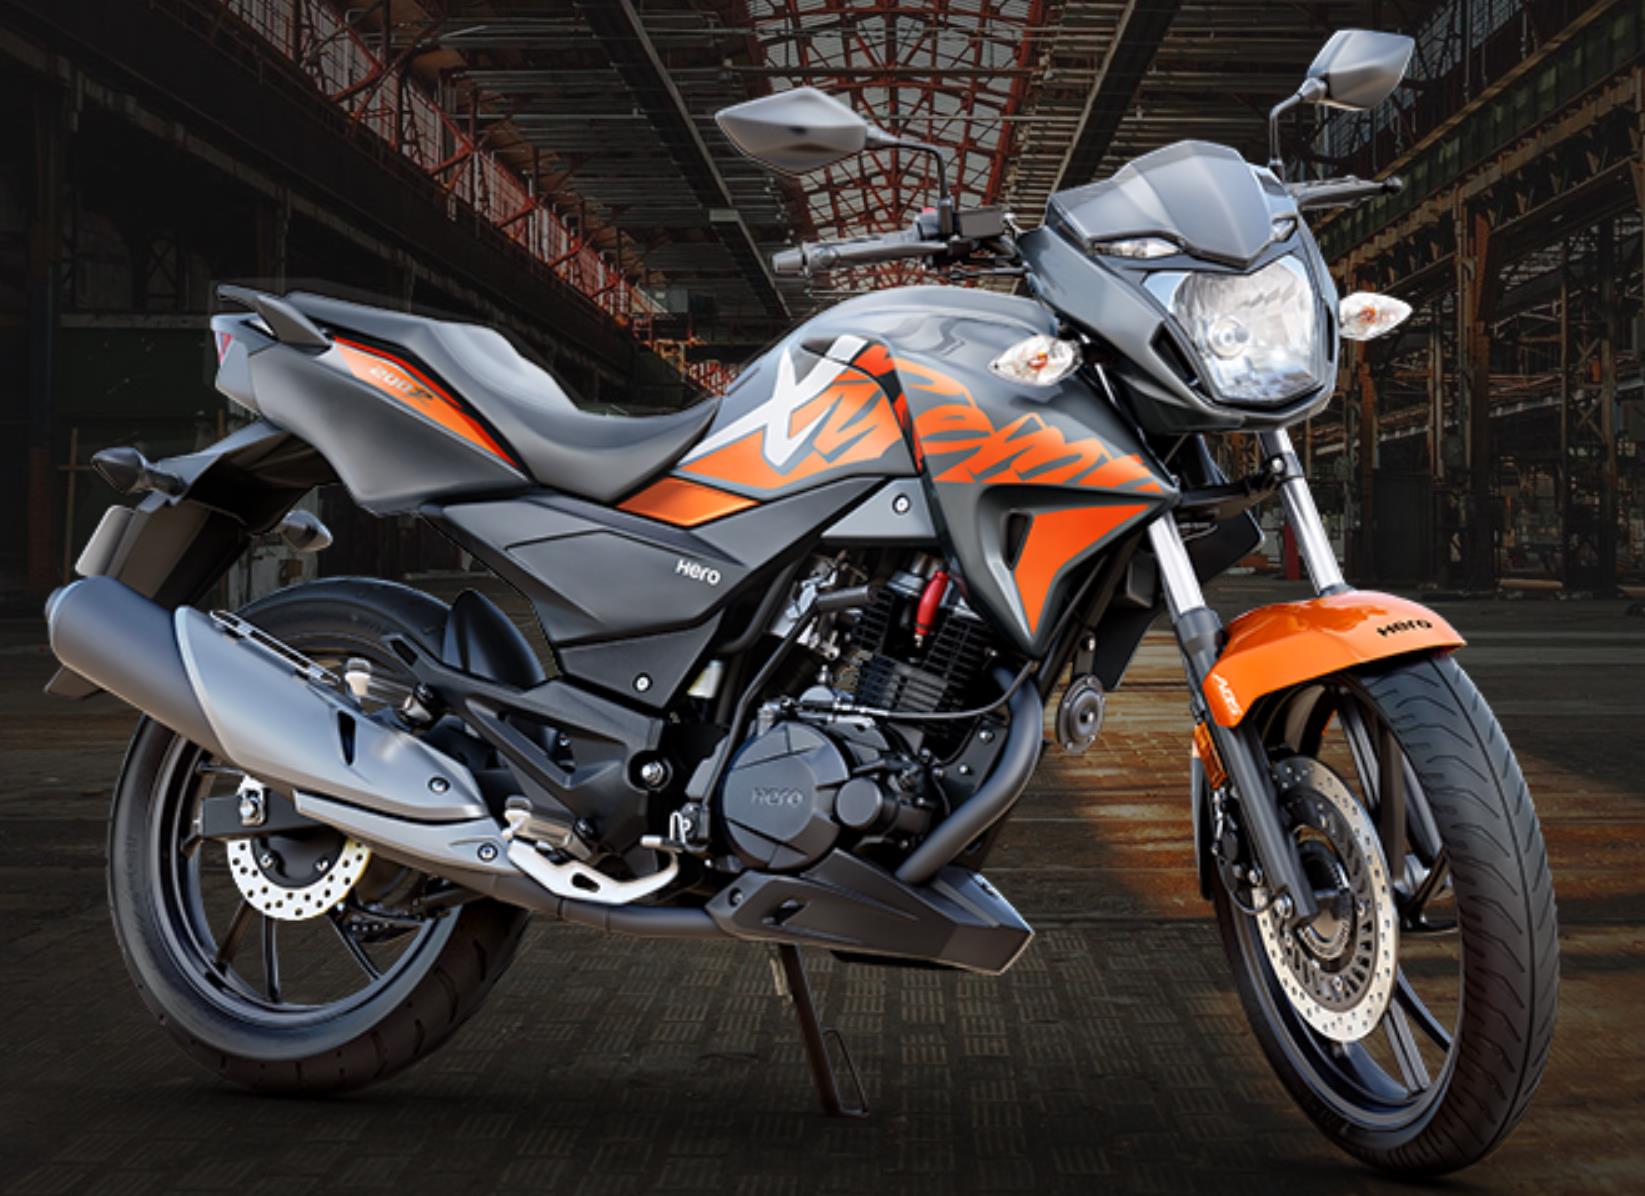 2023 Hero Xtreme 200R Specifications And Expected Price In India